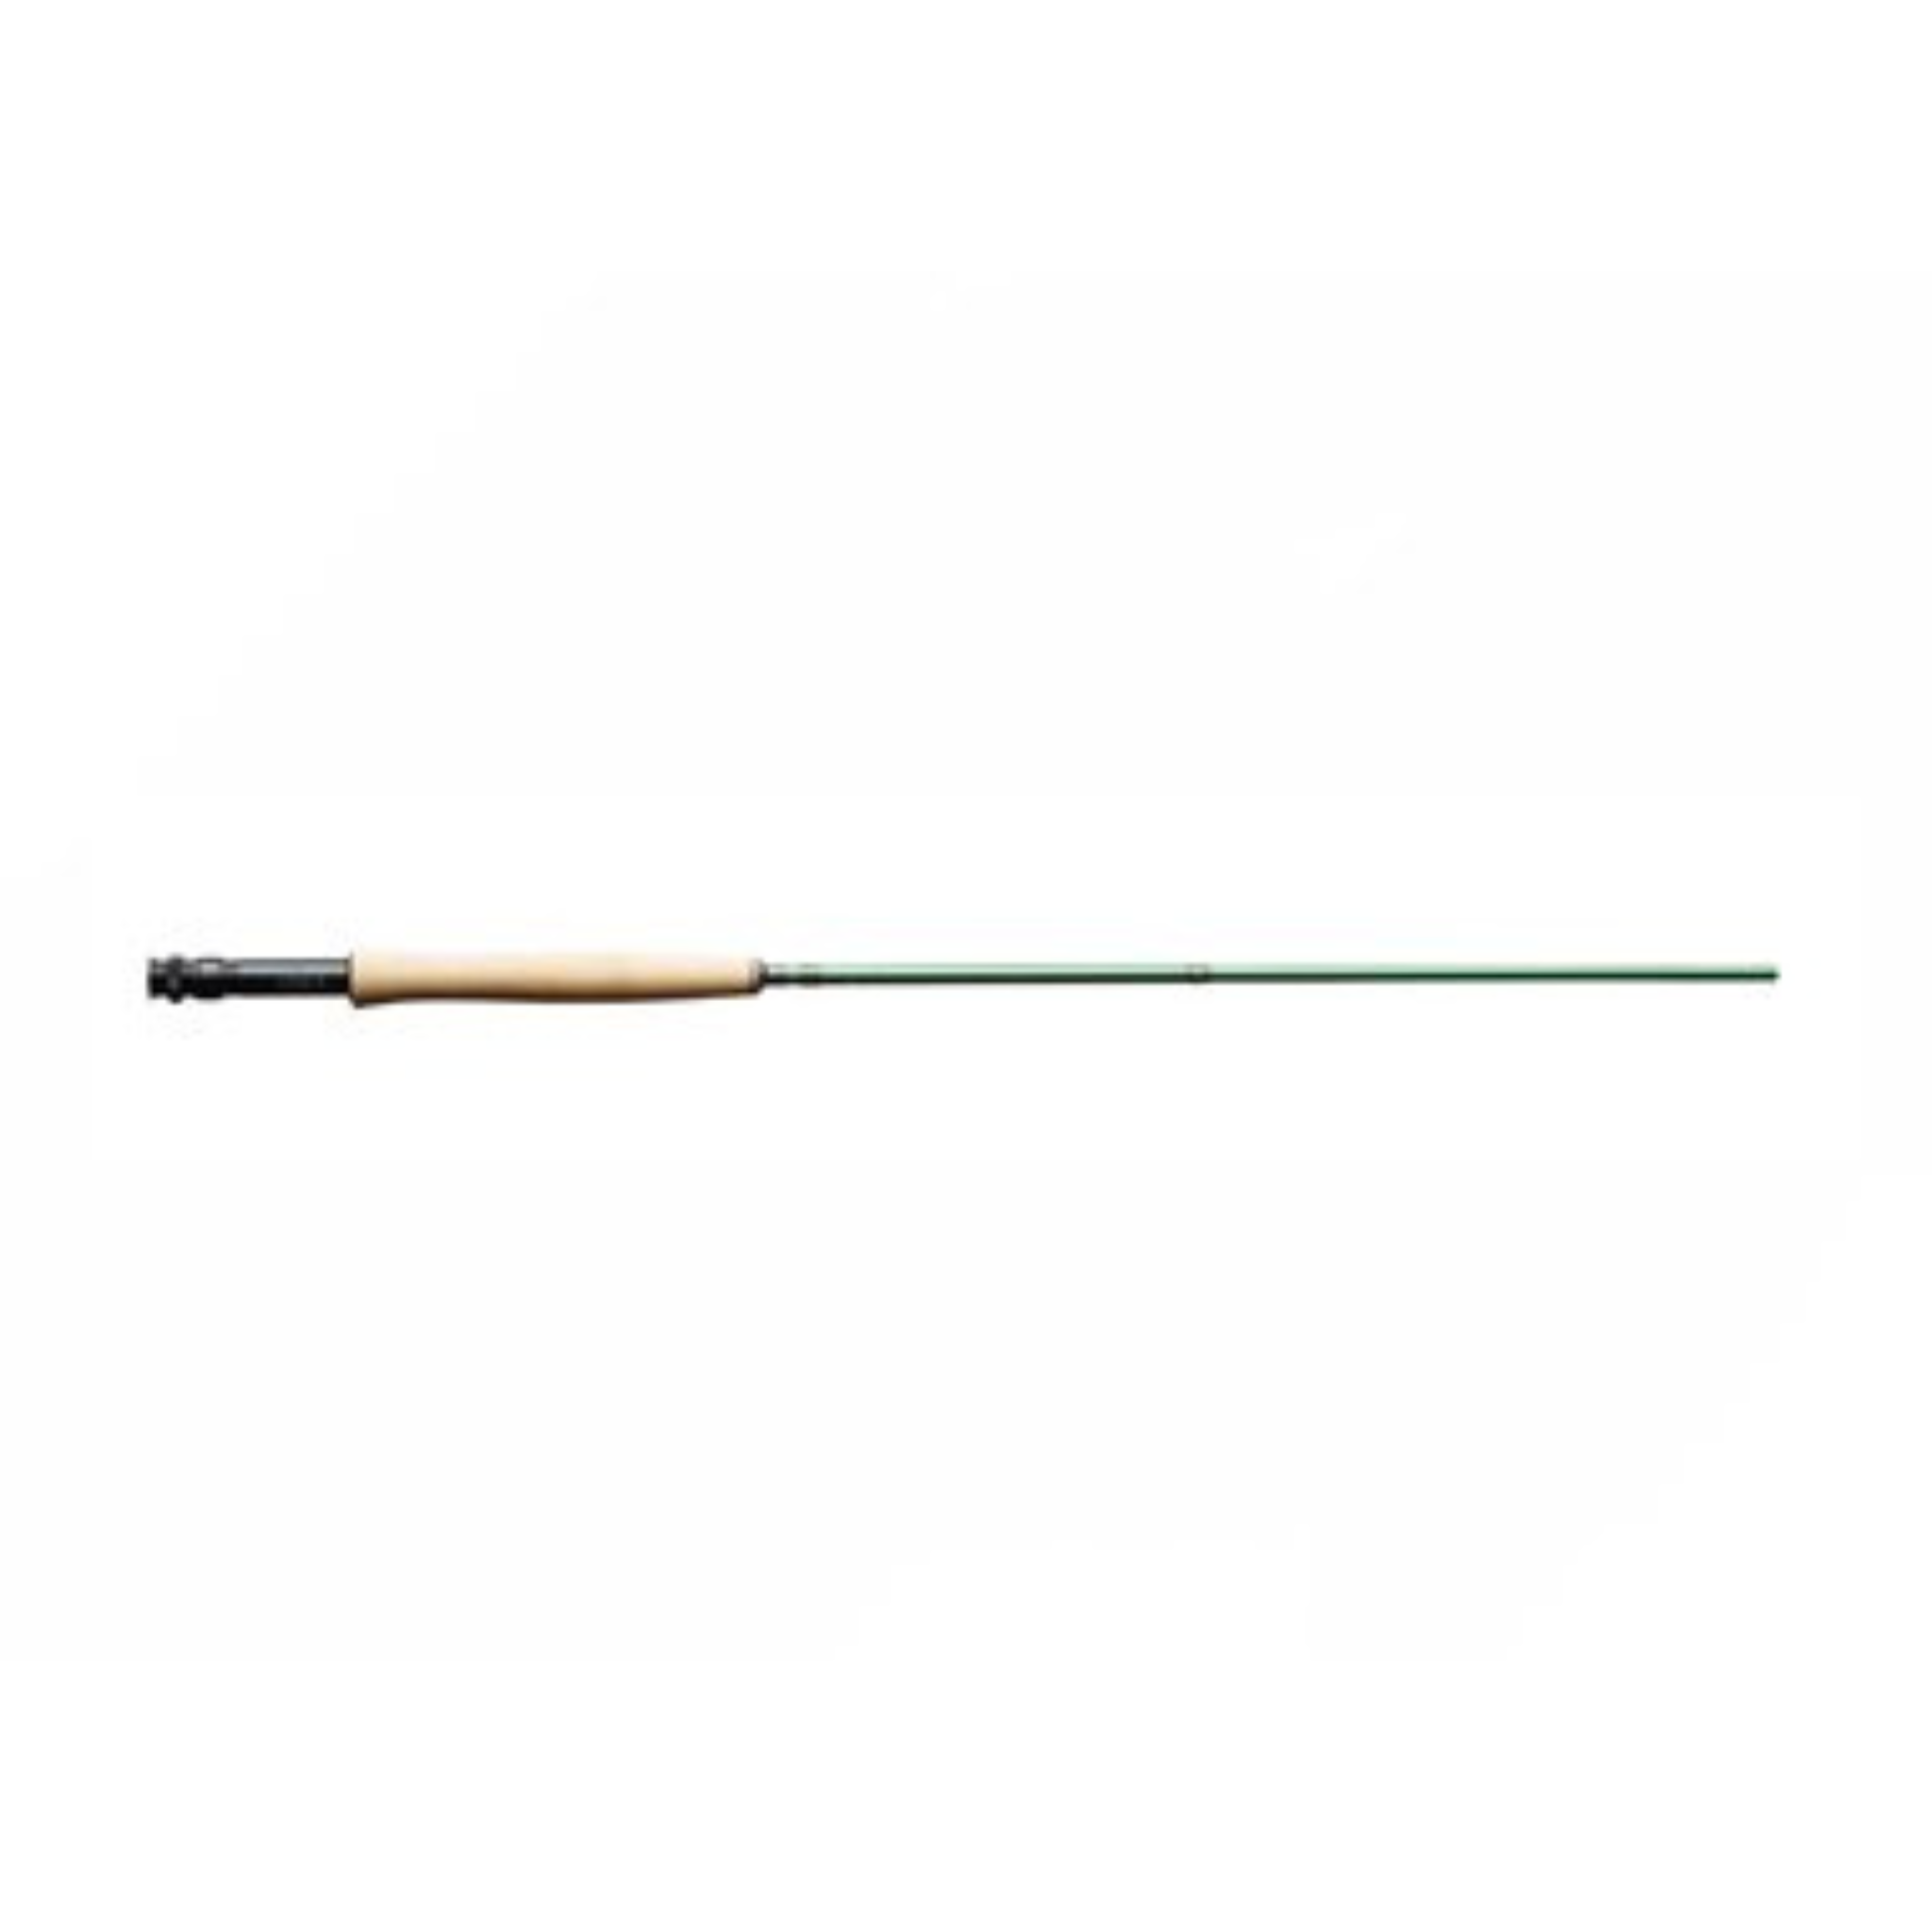 Redington Crosswater Fly Rod Review - Man Makes Fire